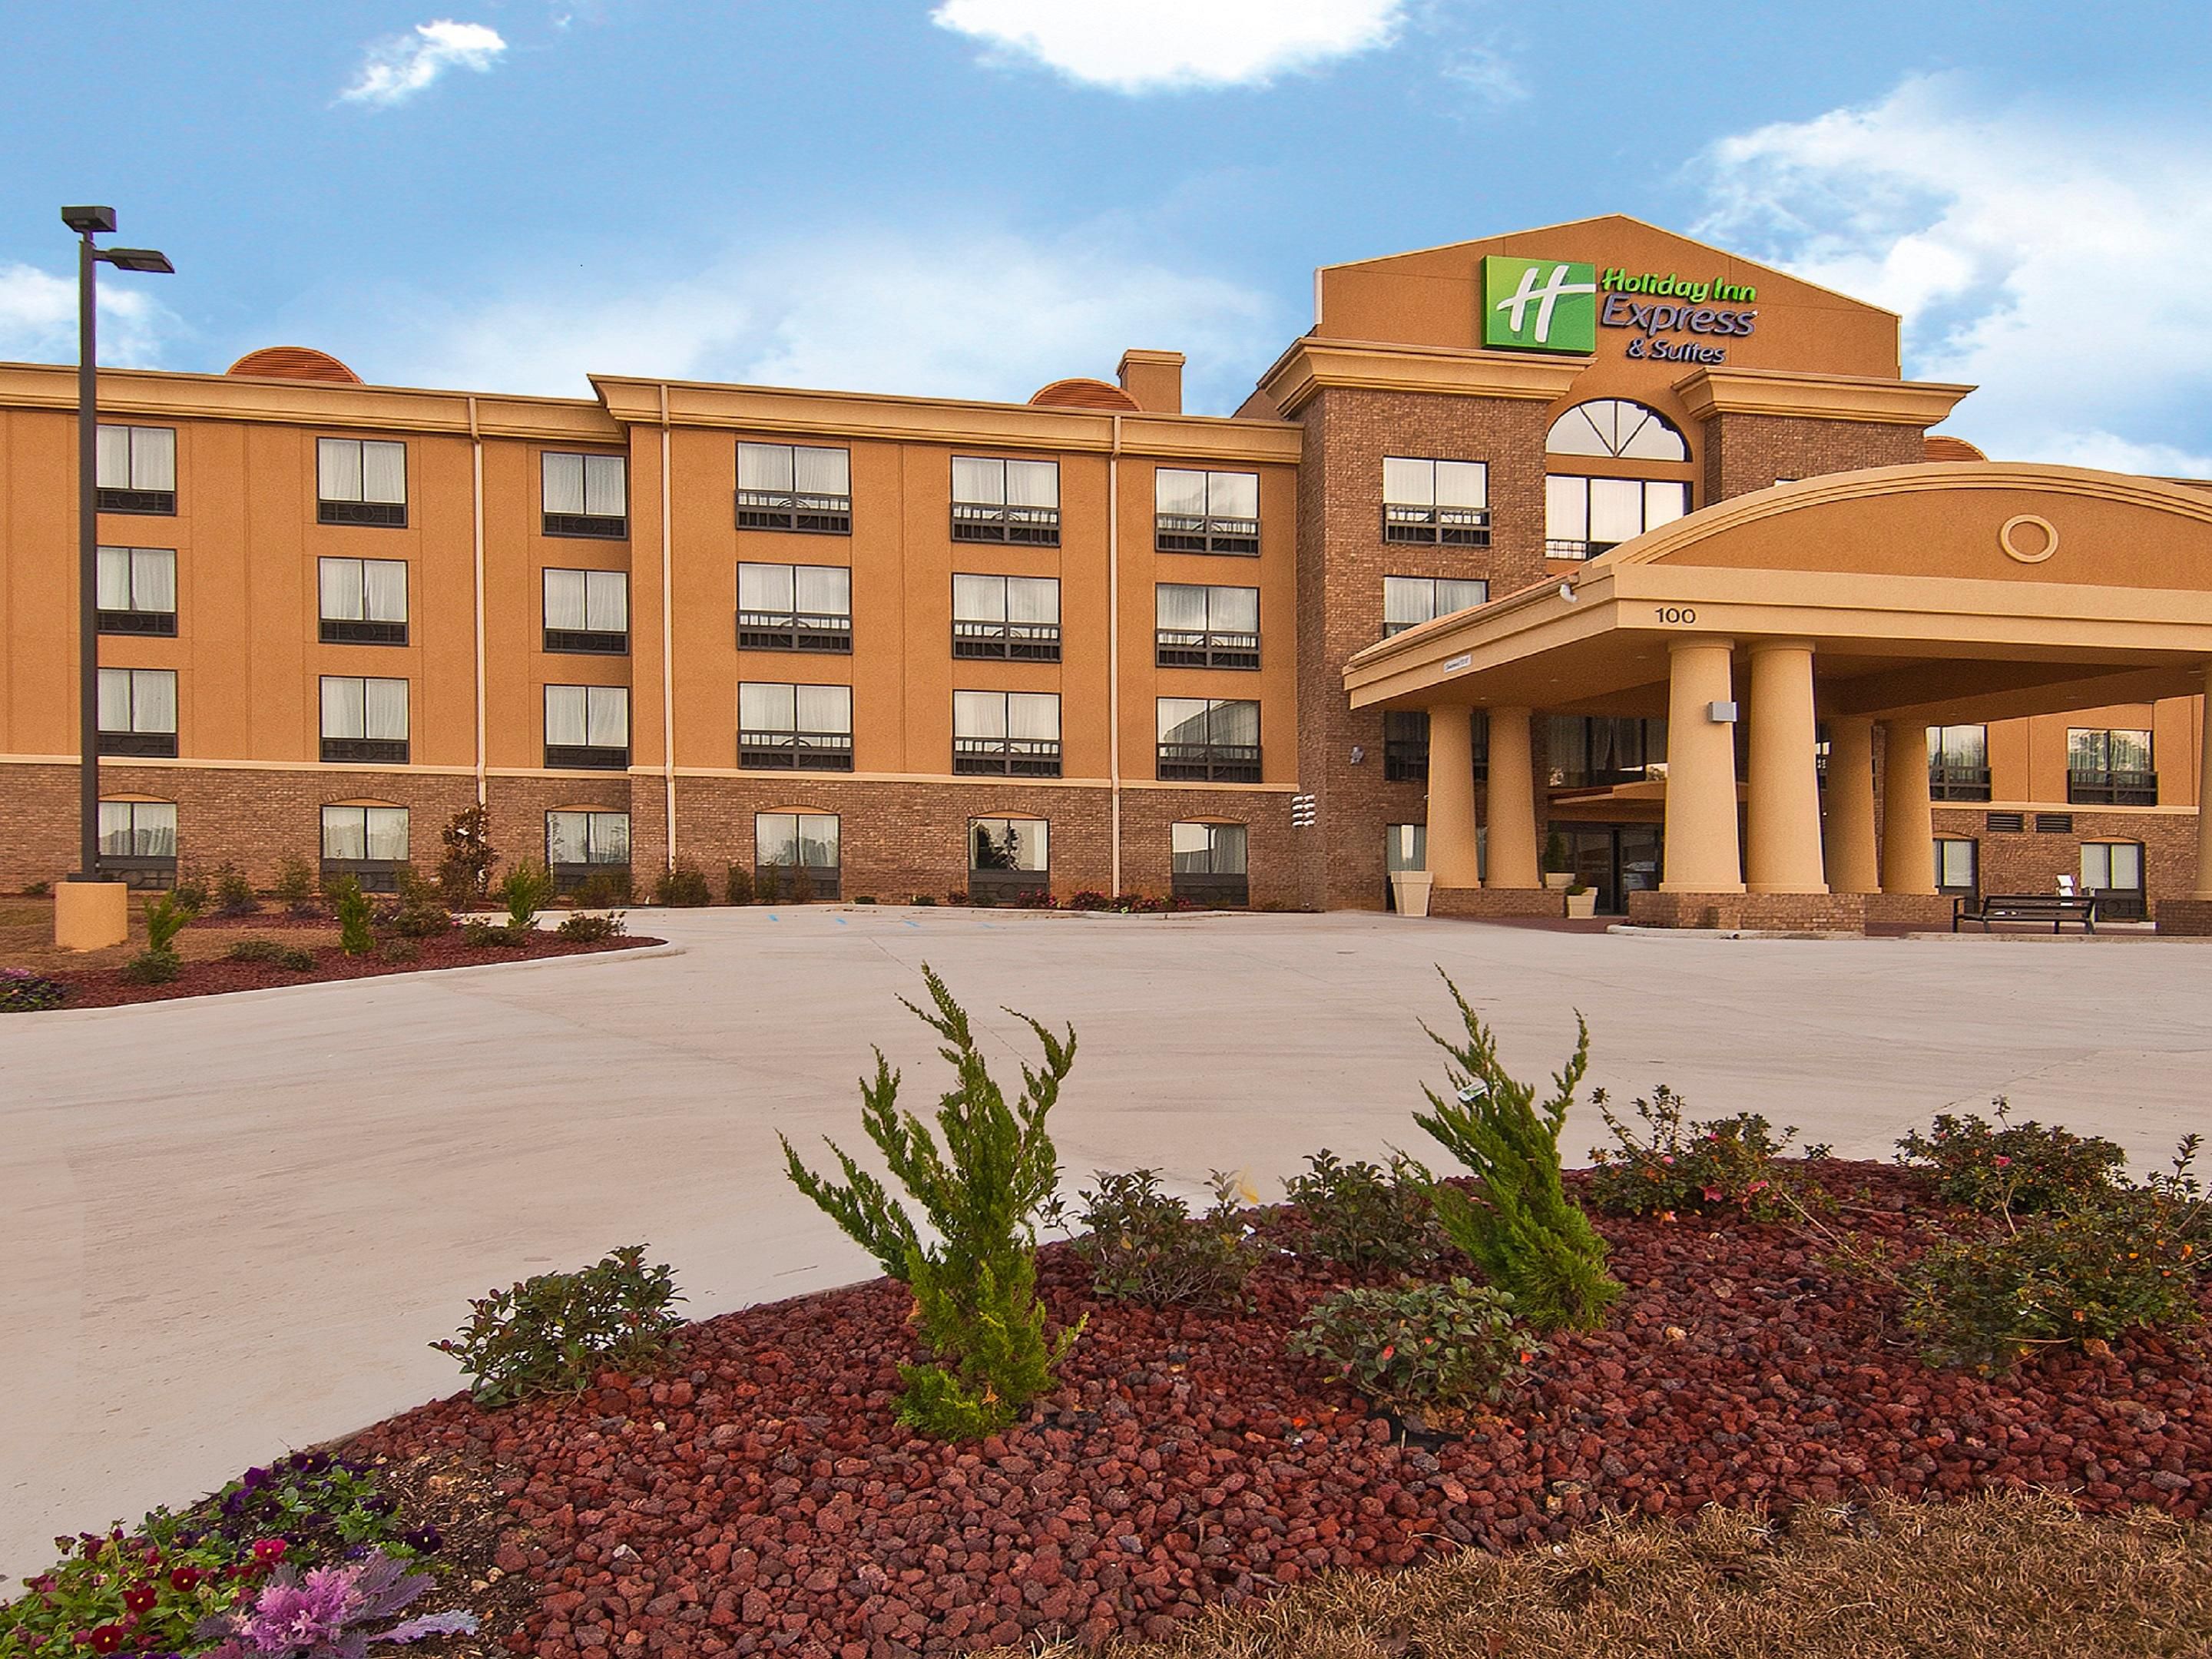 hotels in pearl, ms near jackson | holiday inn express